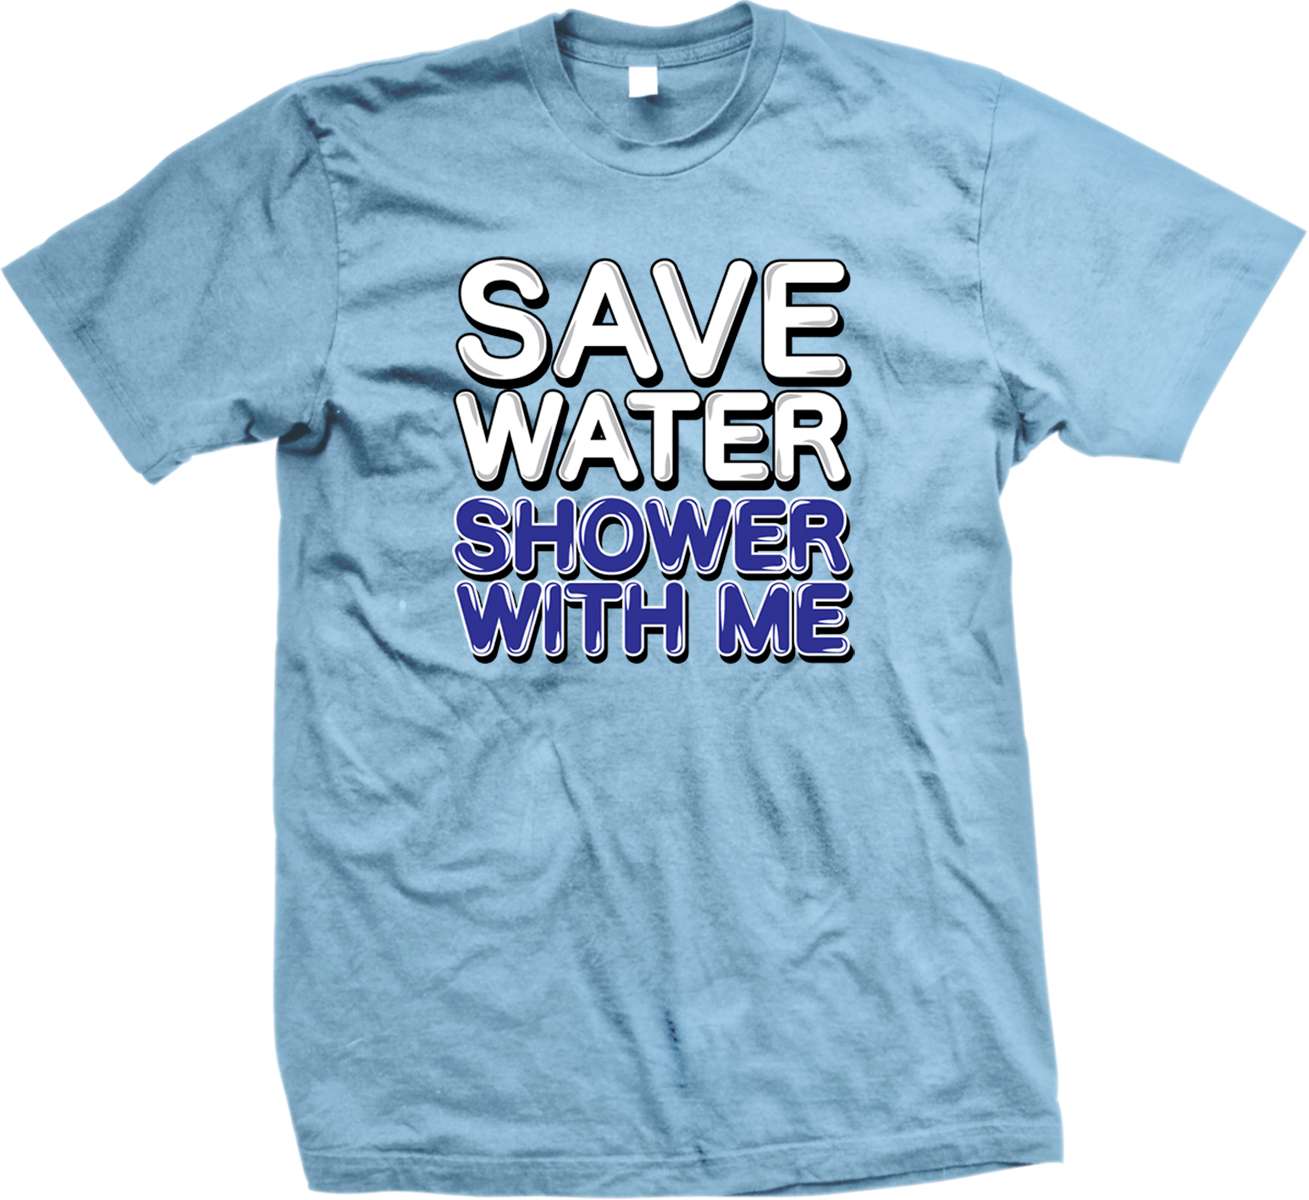 Save Water Shower with Me - Adult Humor Funny Sayings Mens T-shirt | eBay